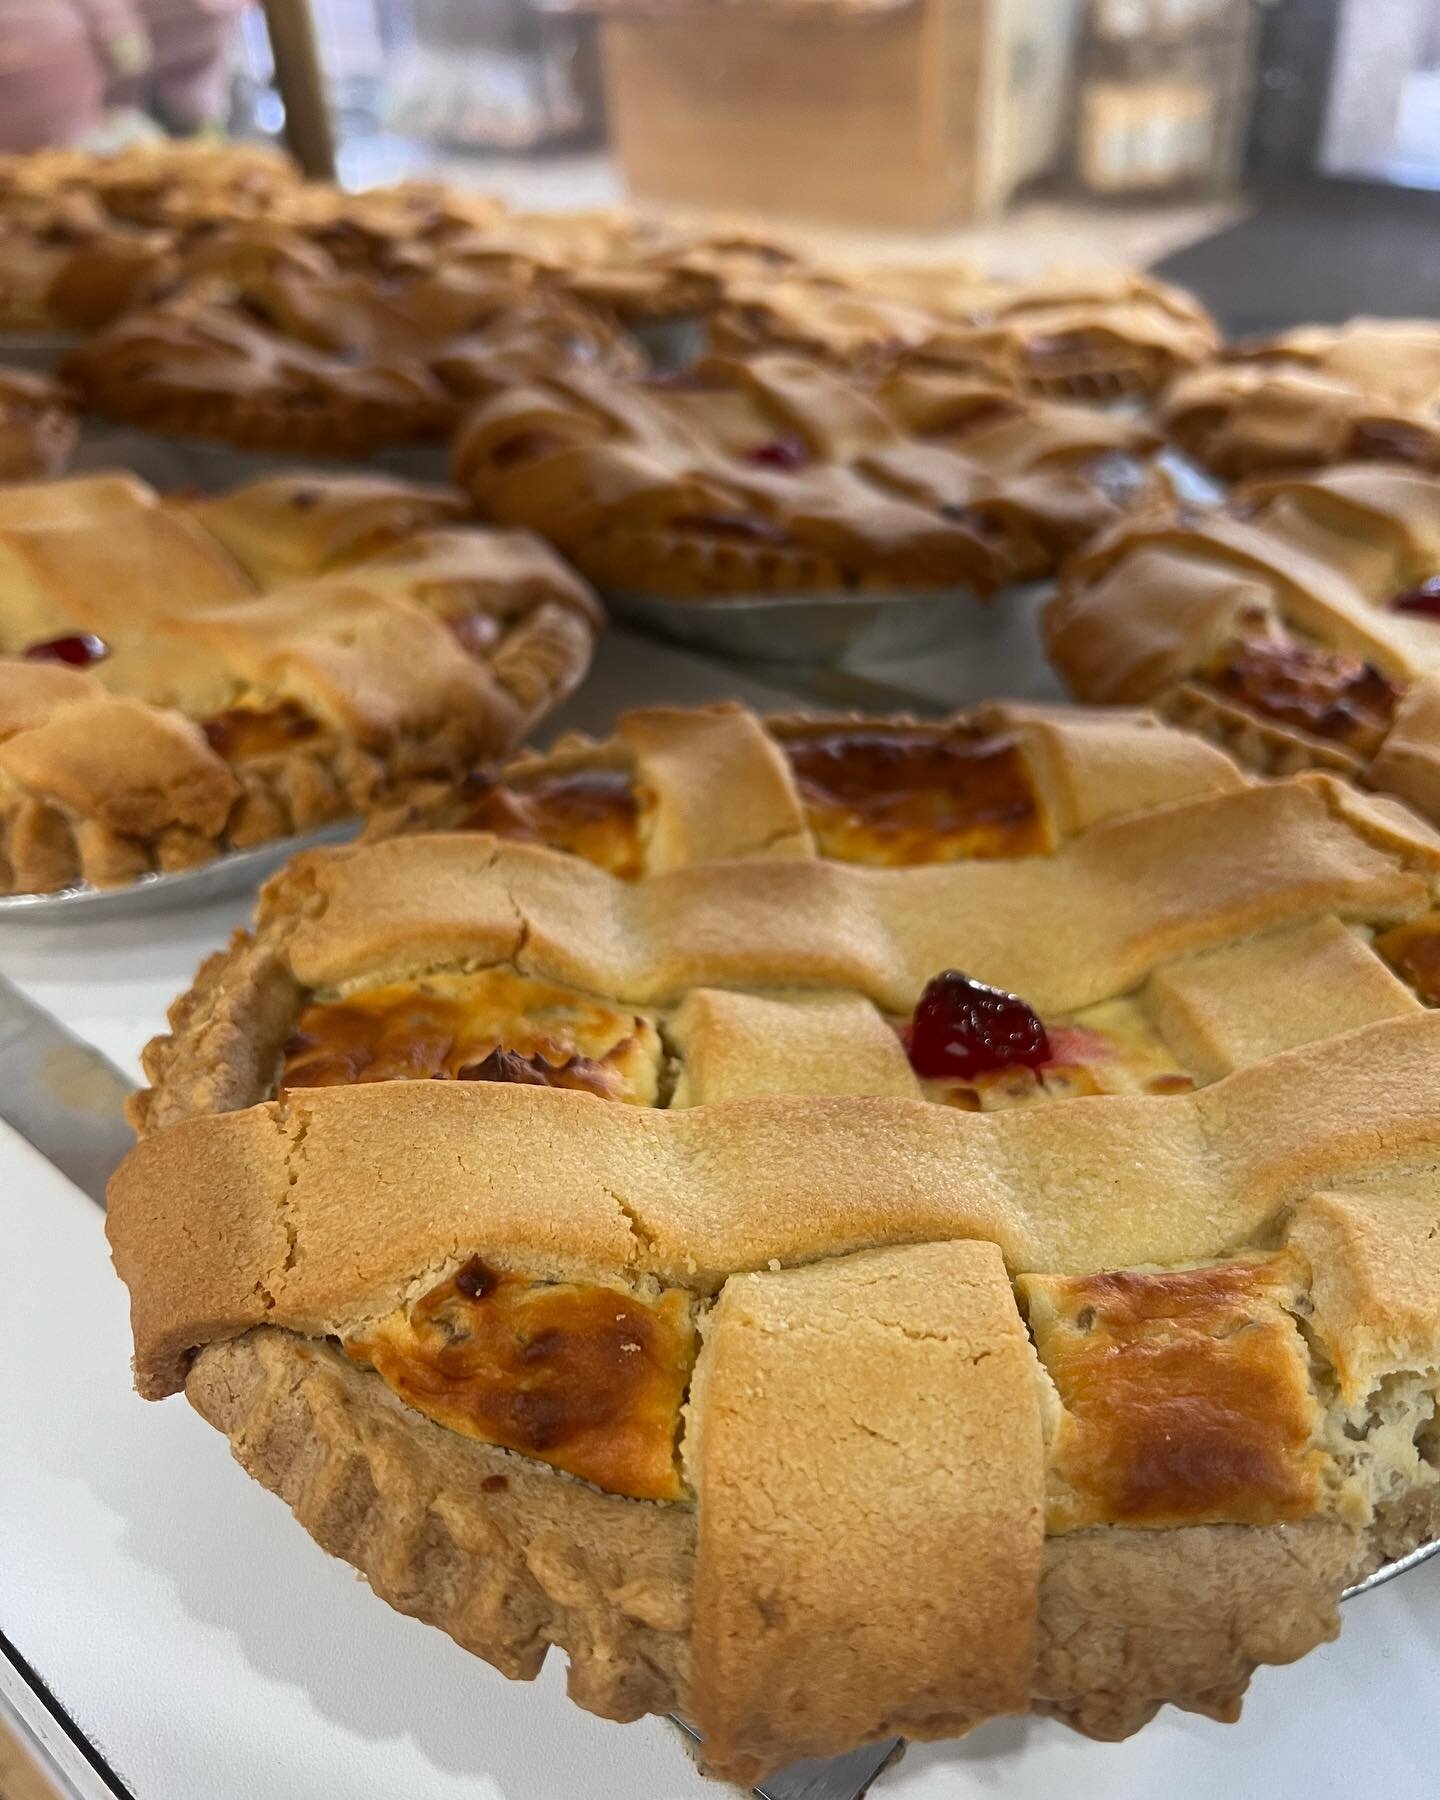 Happy Easter! 🐰Swing by and grab yourself one of our traditional Easter grain pies! We are here 6am-2pm today! 🥧 🐣 
-
-
#easter #happyeaster🐰 #grainpie #bakery #longisland